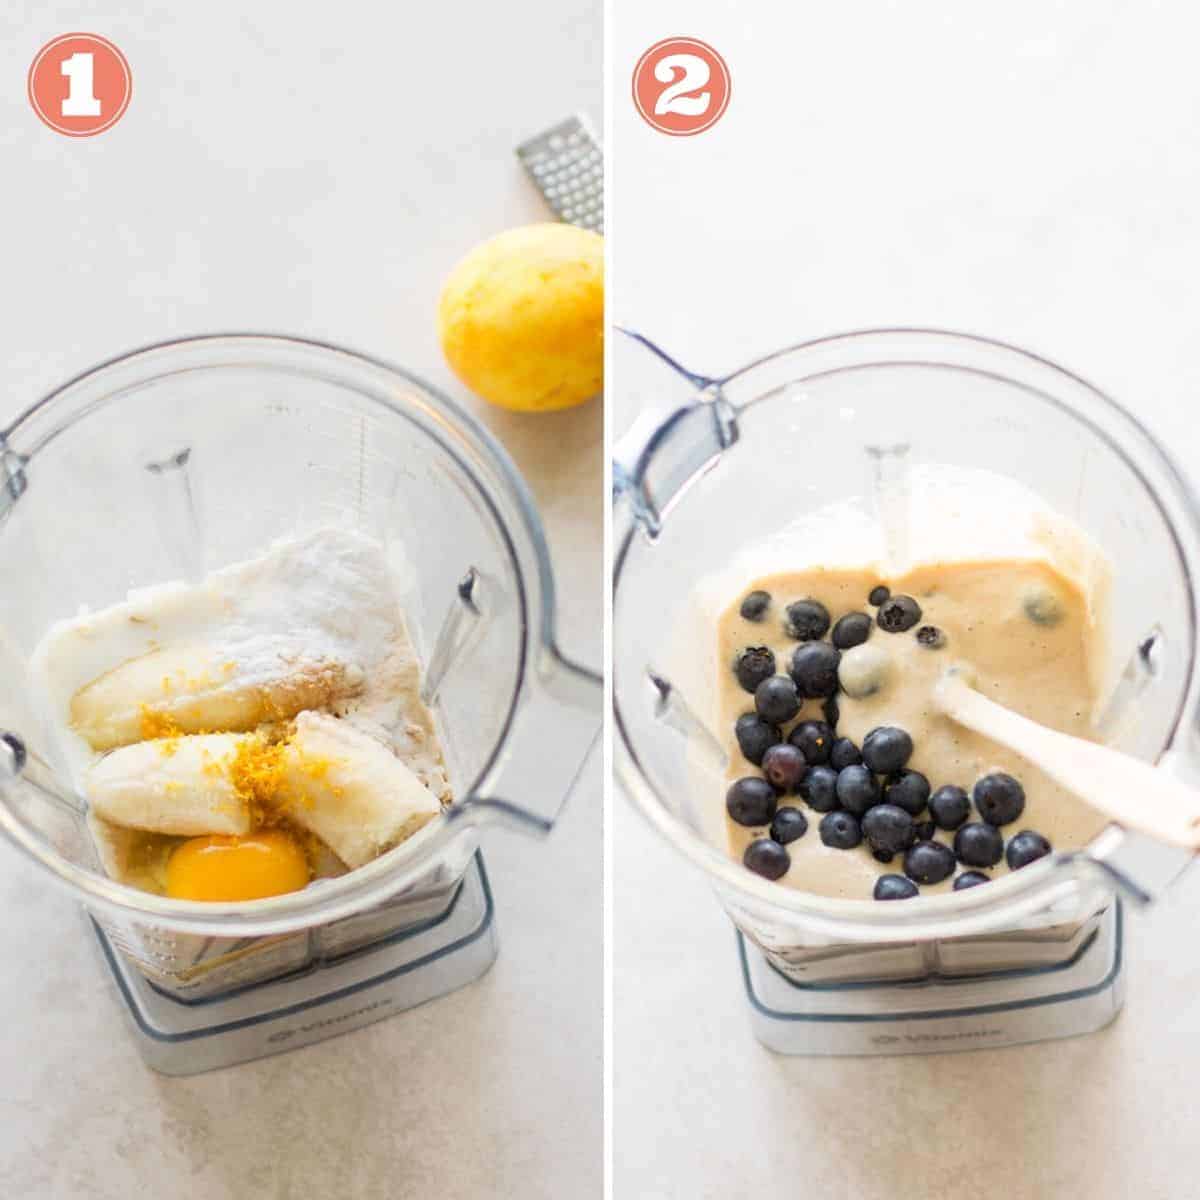 banana, egg, kefir, lemon, and the rest of the ingredients in a blender before lending on the left side and post-blended with fresh blueberries stirred in on the right image